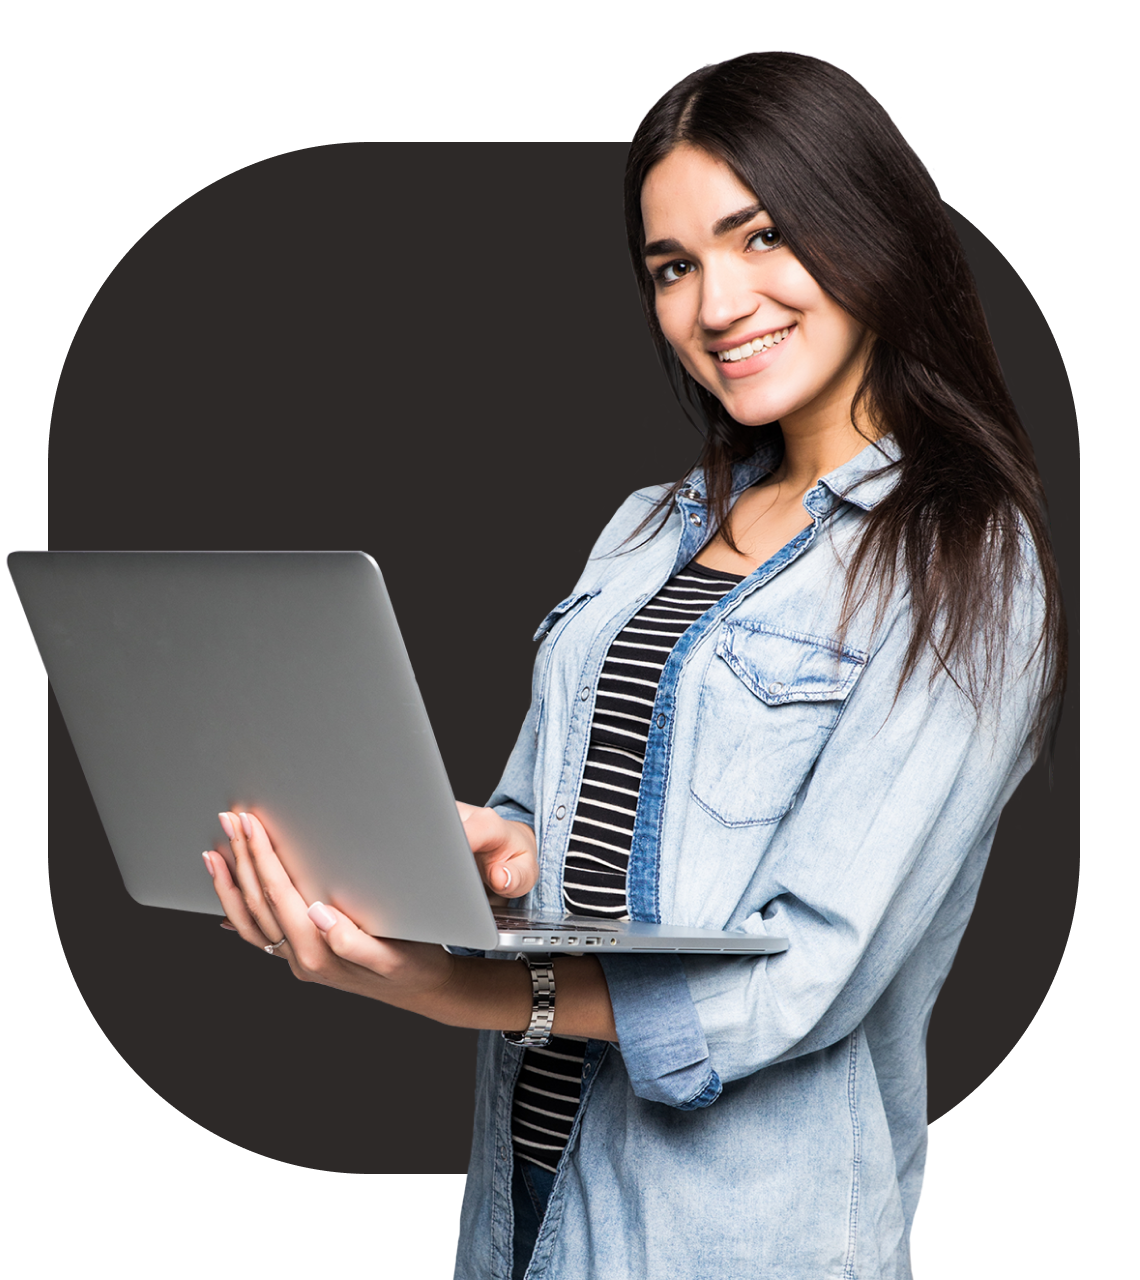 api wordpress delivery integration borzo - young woman smiling with laptop - borzo delivery India